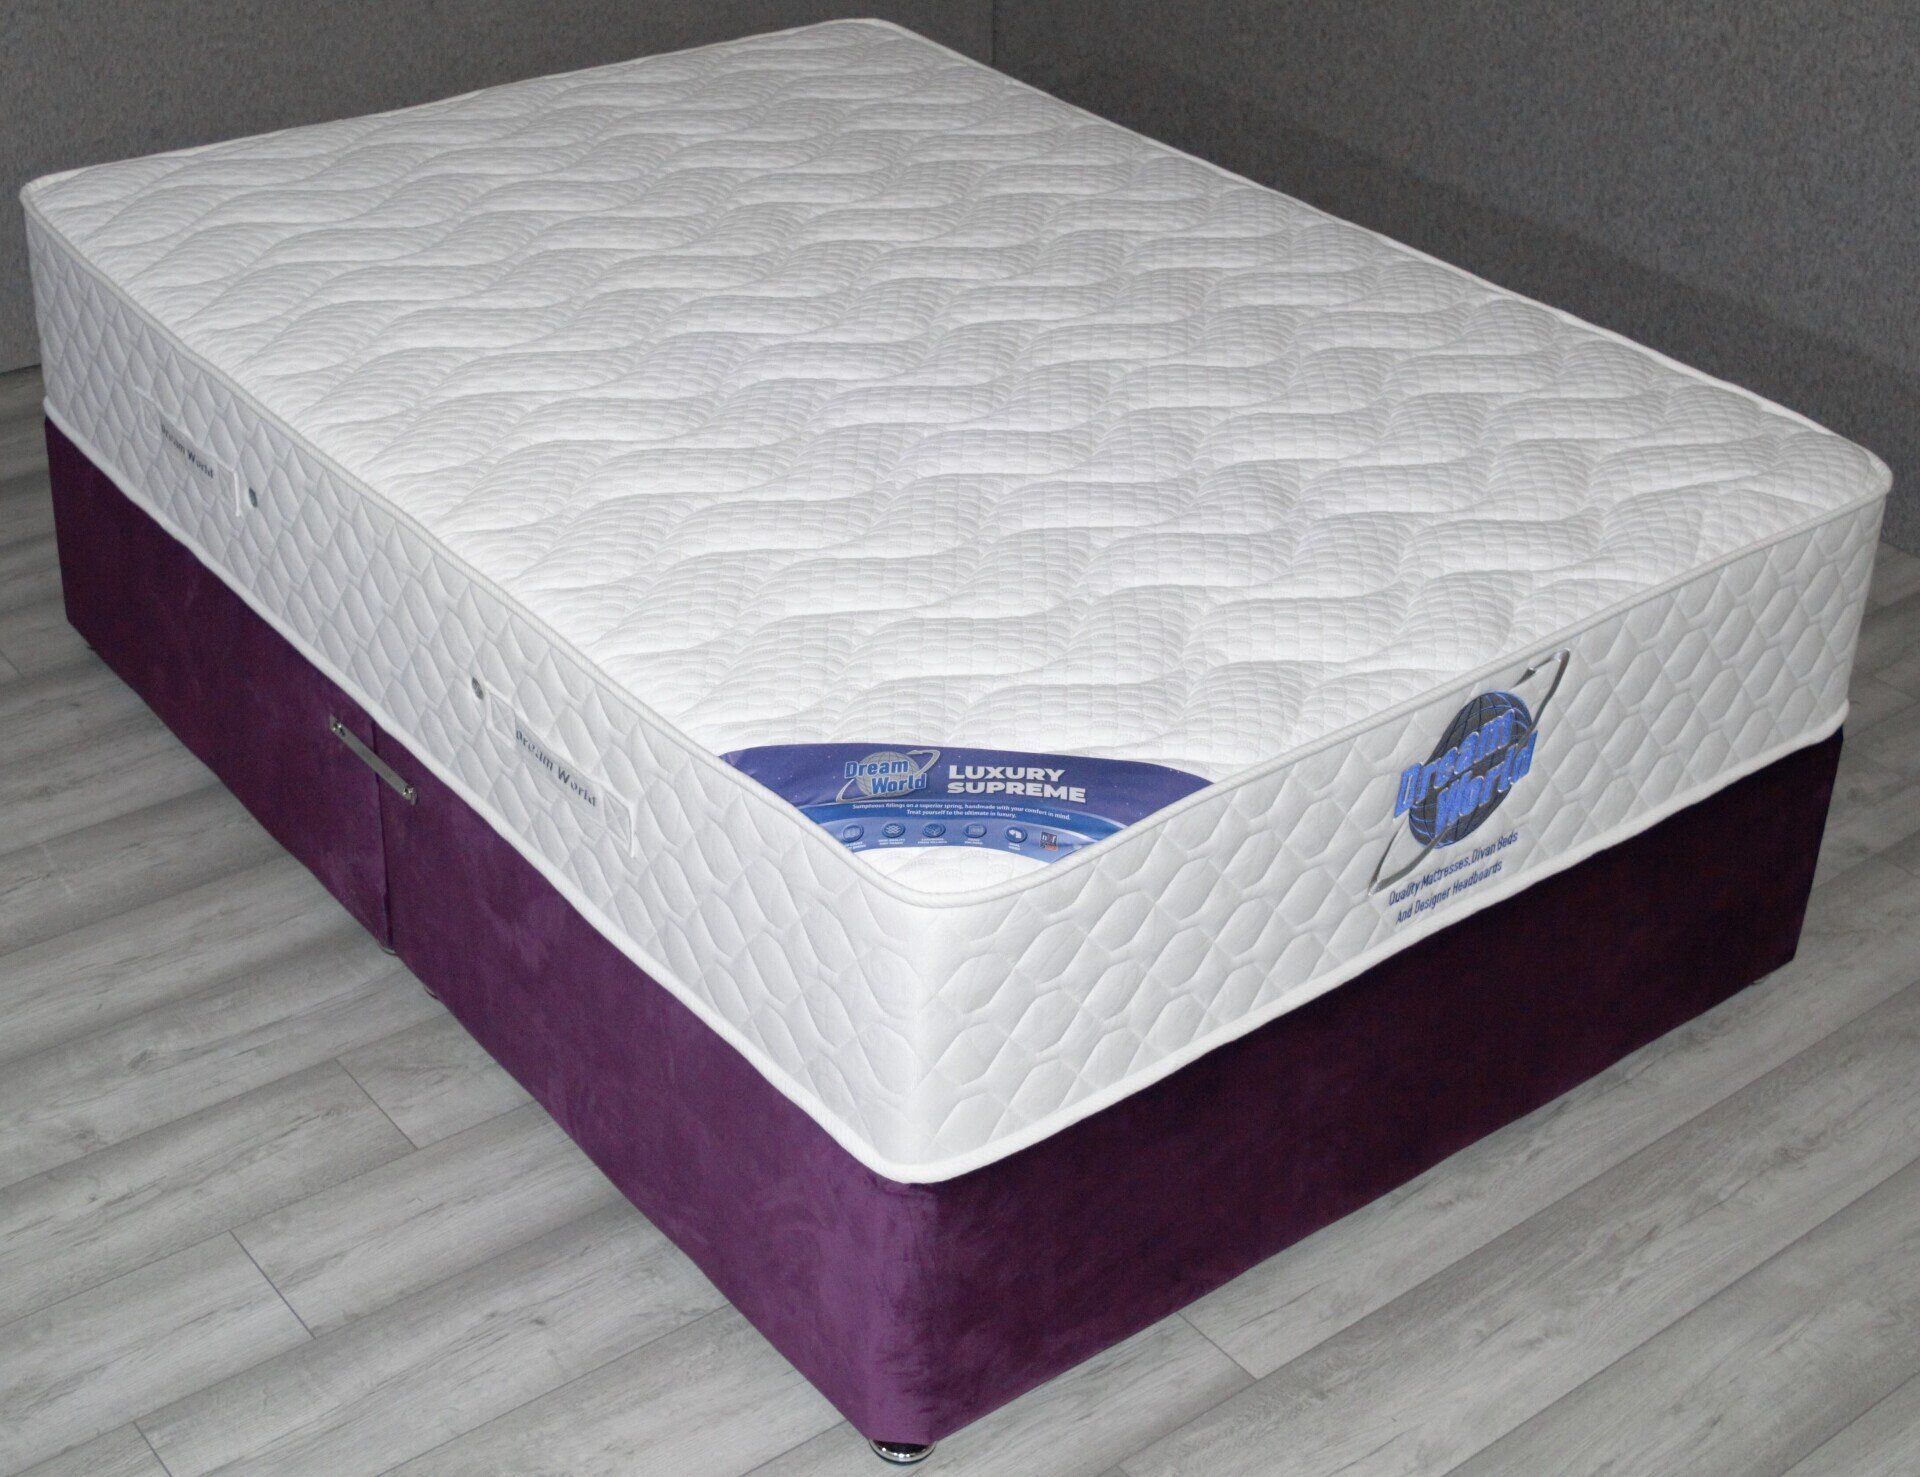 pocket spring bed company mulberry mattress